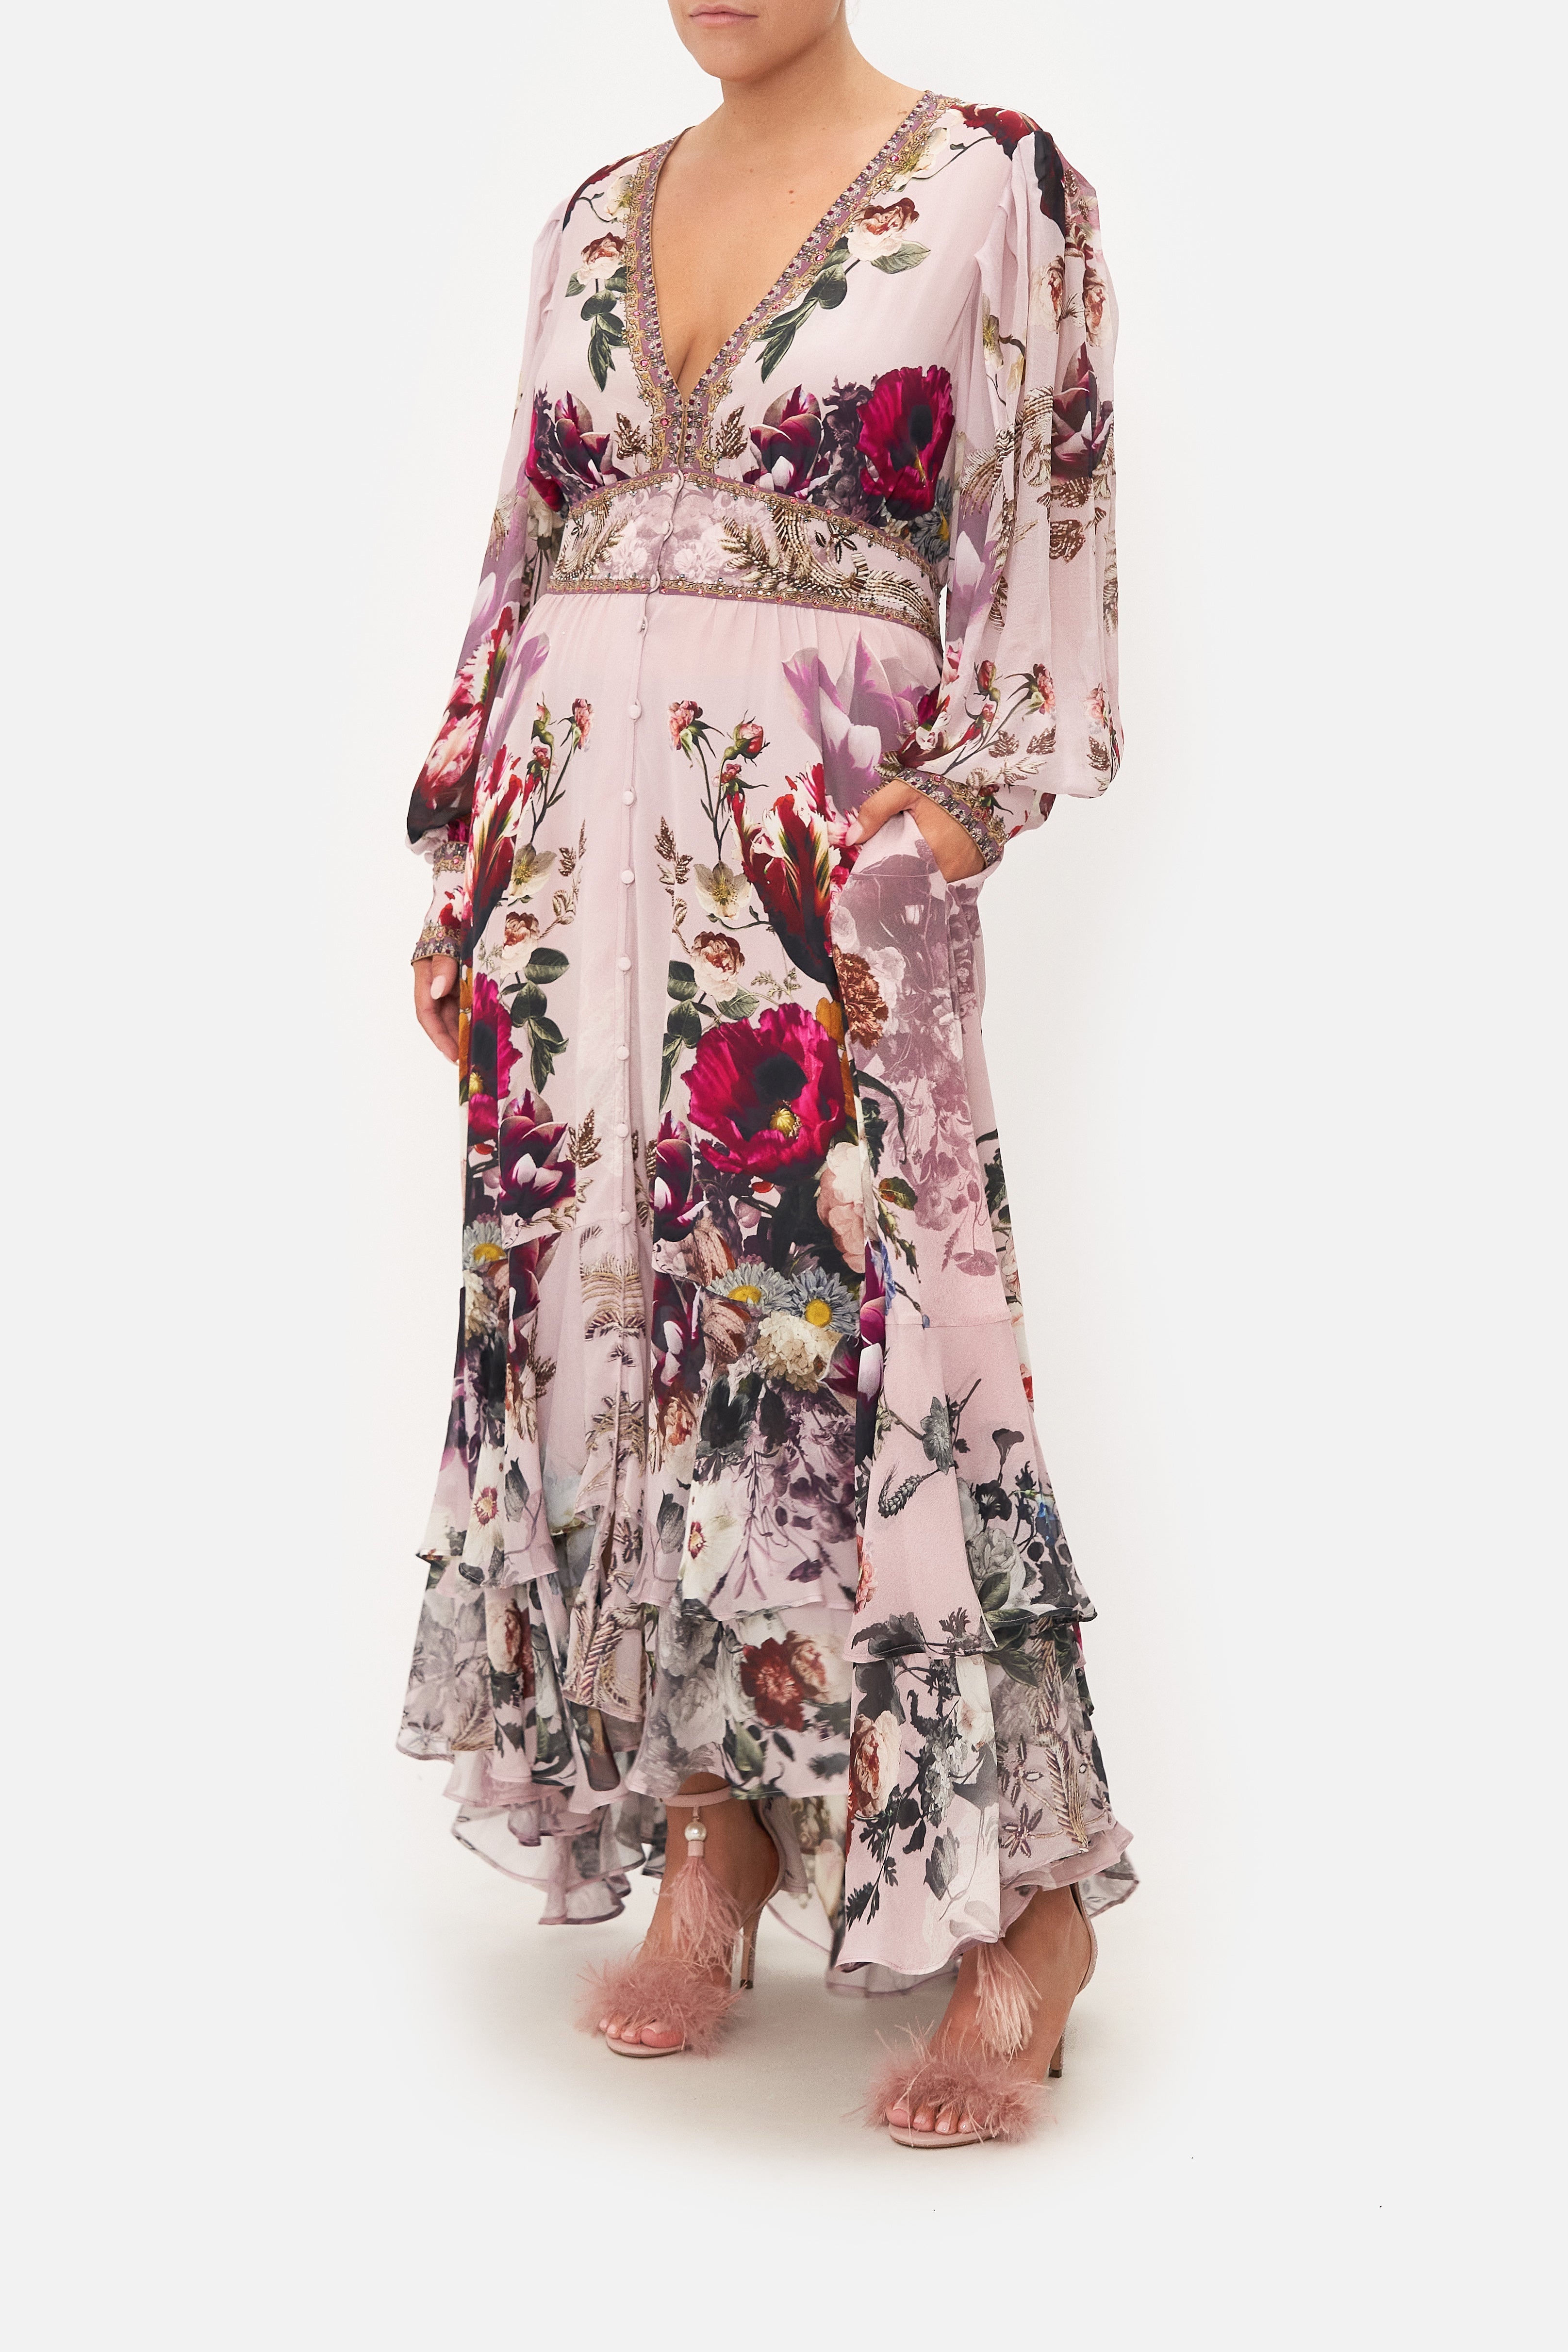 LONG BUTTON FRONT DRESS GYPSY ROSE